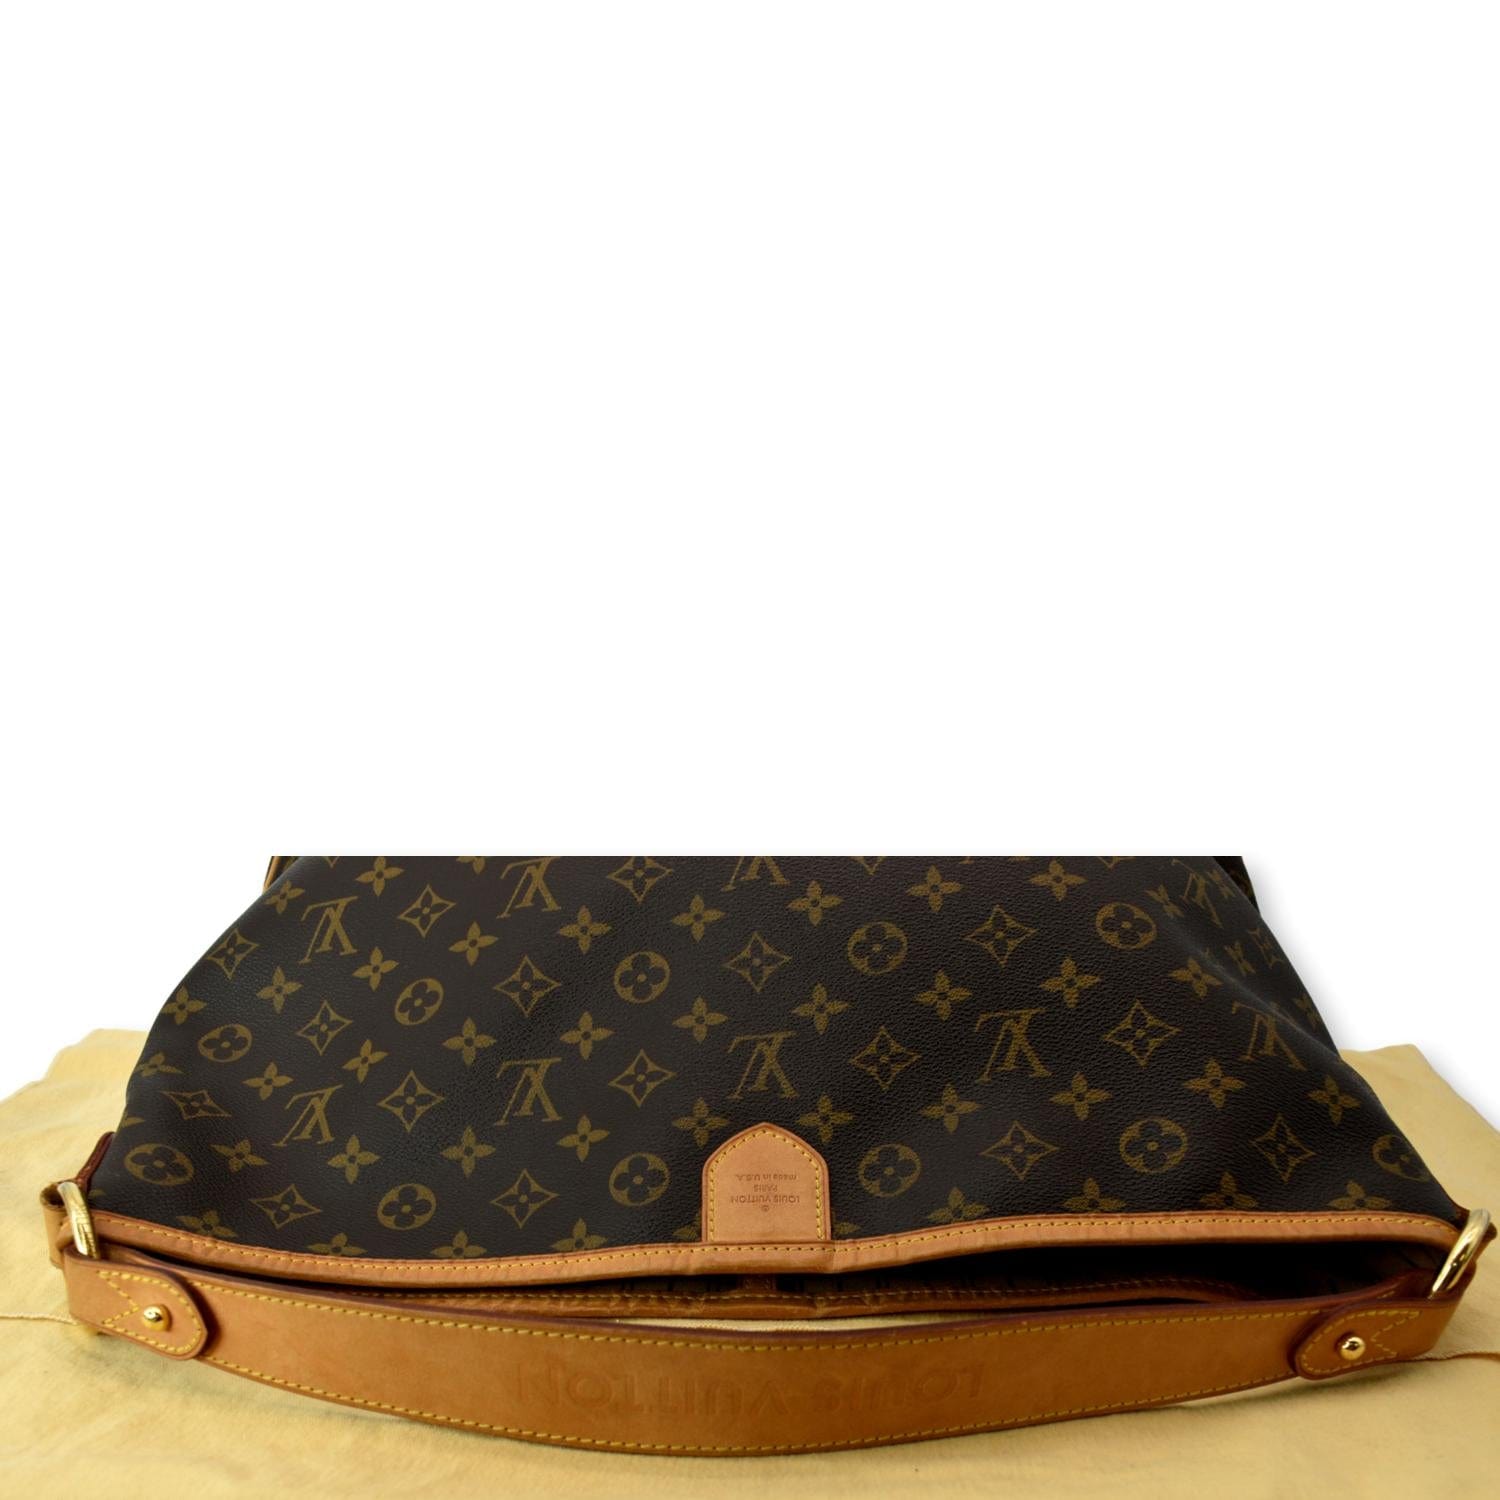 Louis Vuitton Monogram Delightful MM Hobo with Pivone - A World Of